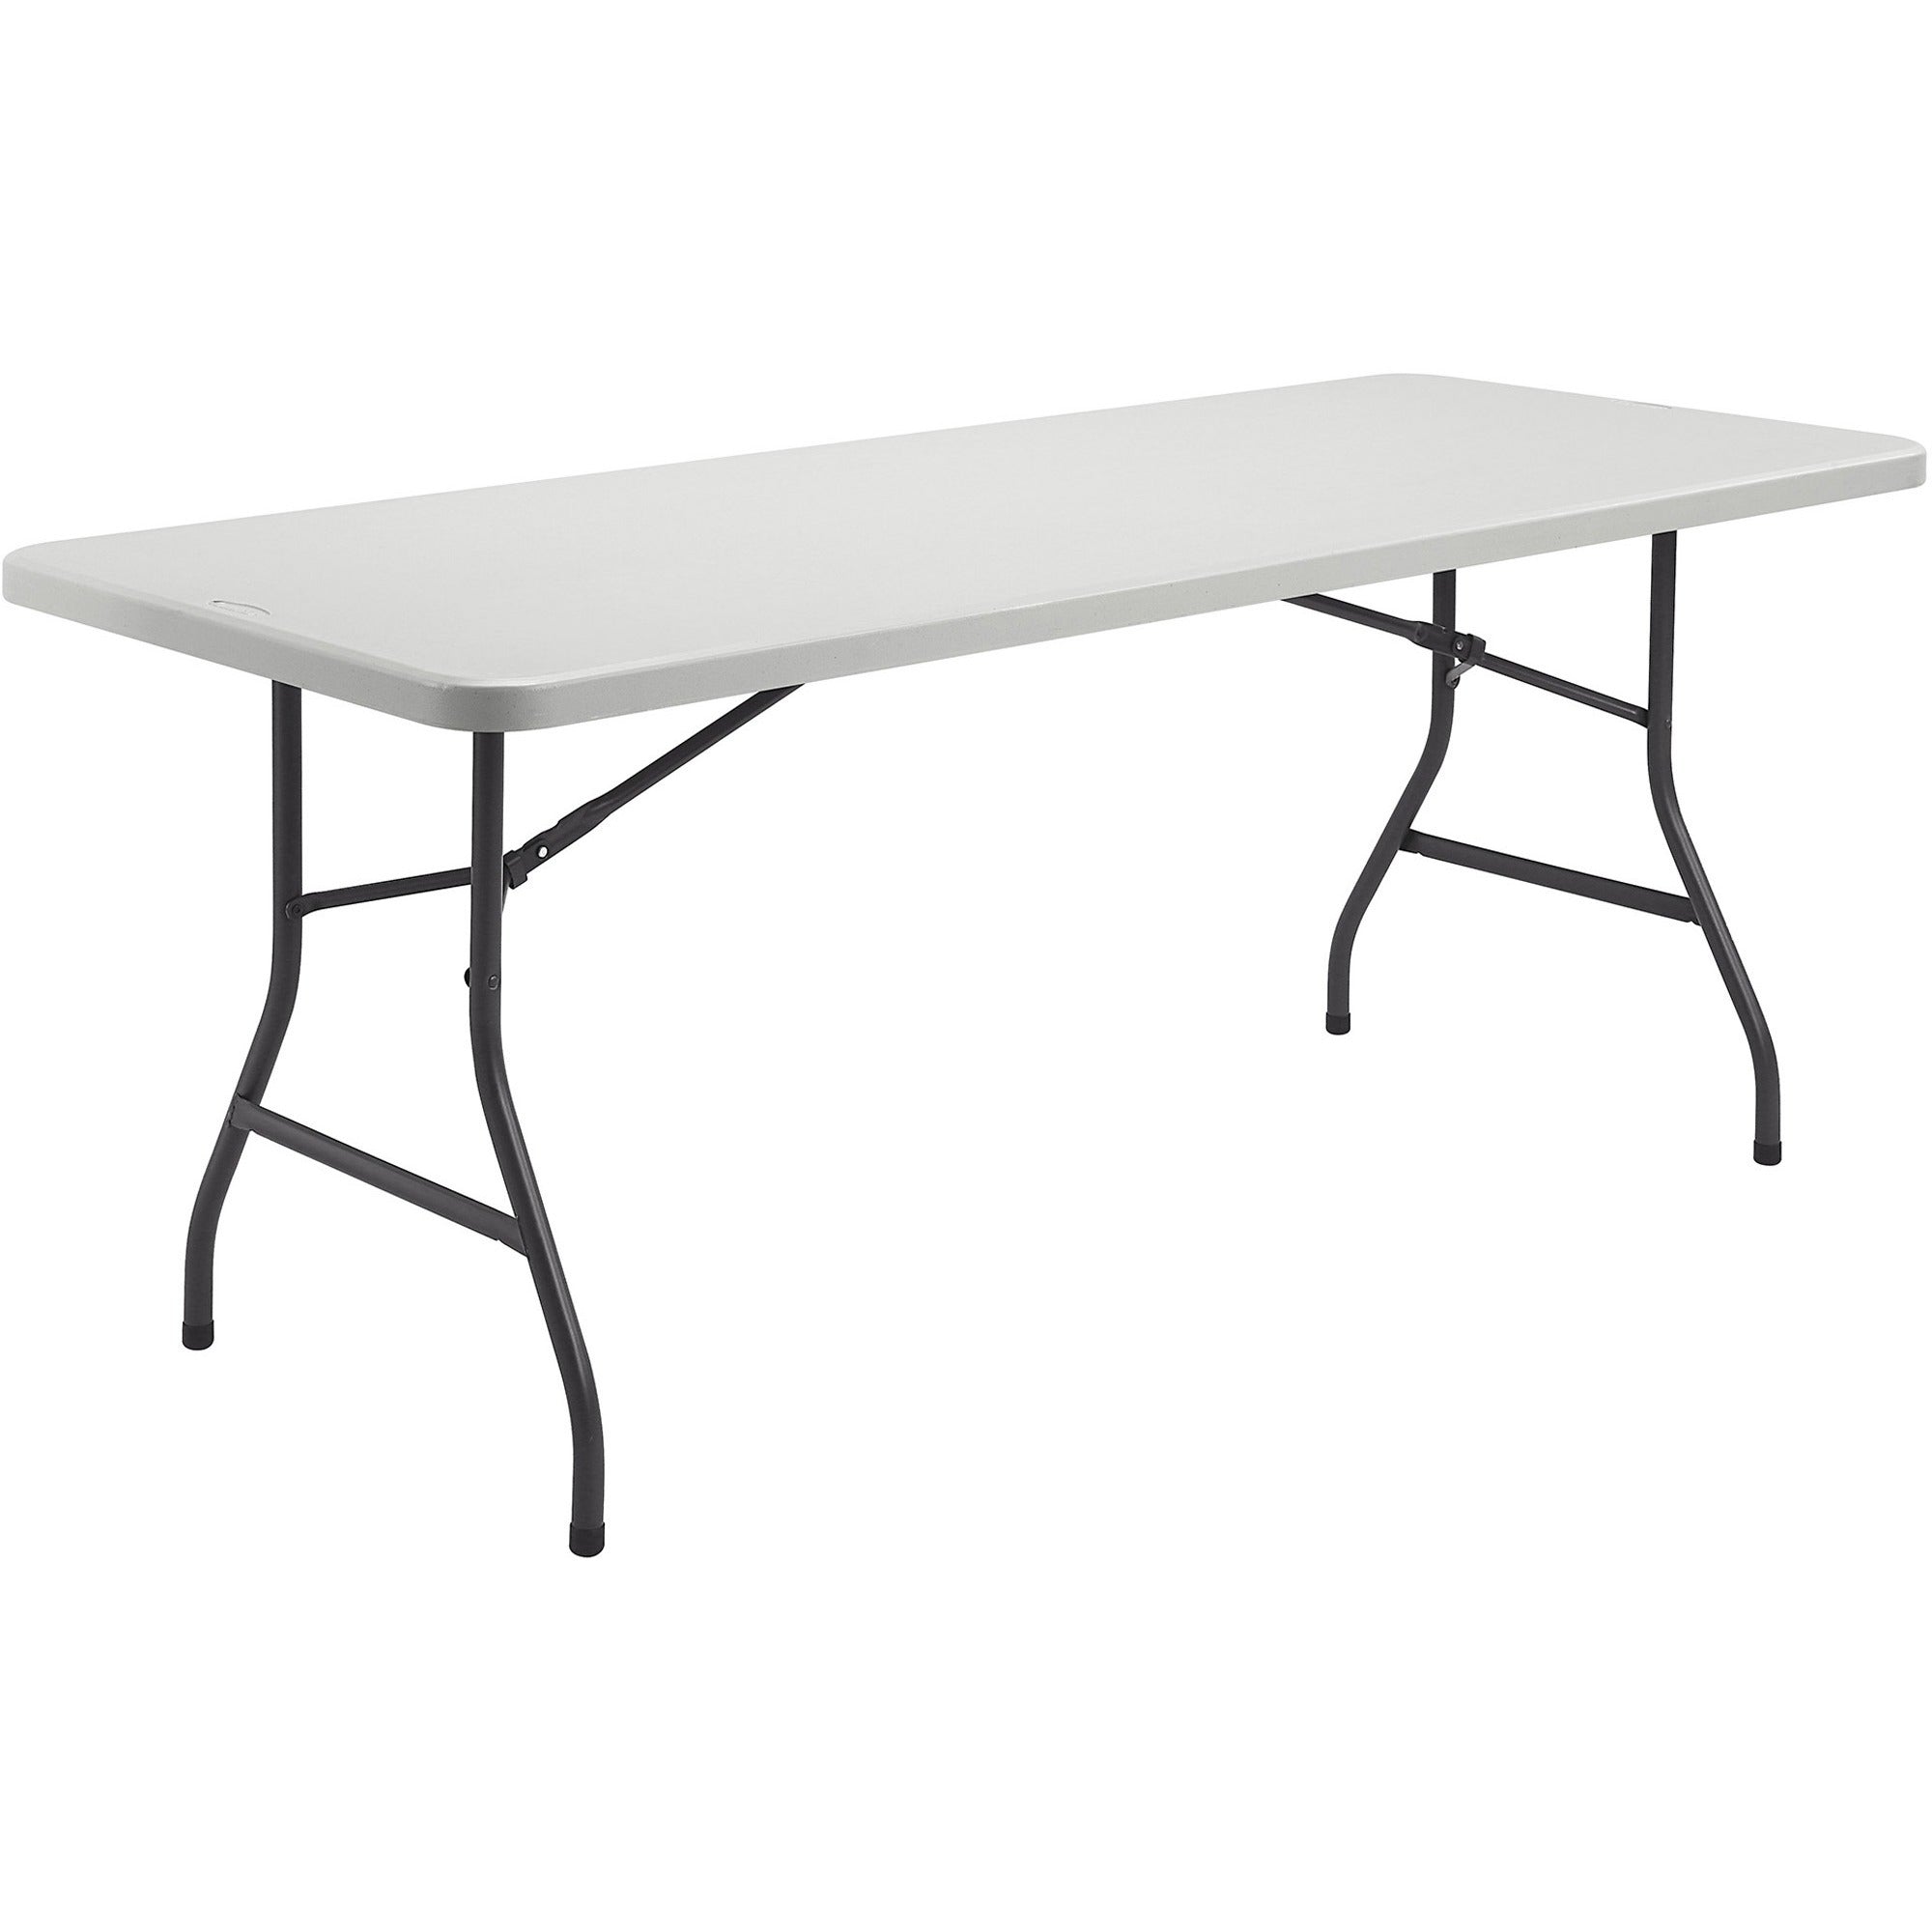 lorell-ultra-lite-banquet-table-for-table-toplight-gray-rectangle-top-dark-gray-folding-base-600-lb-capacity-x-60-table-top-width-x-30-table-top-depth-x-2-table-top-thickness-29-height-gray-1-each_llr66656 - 4